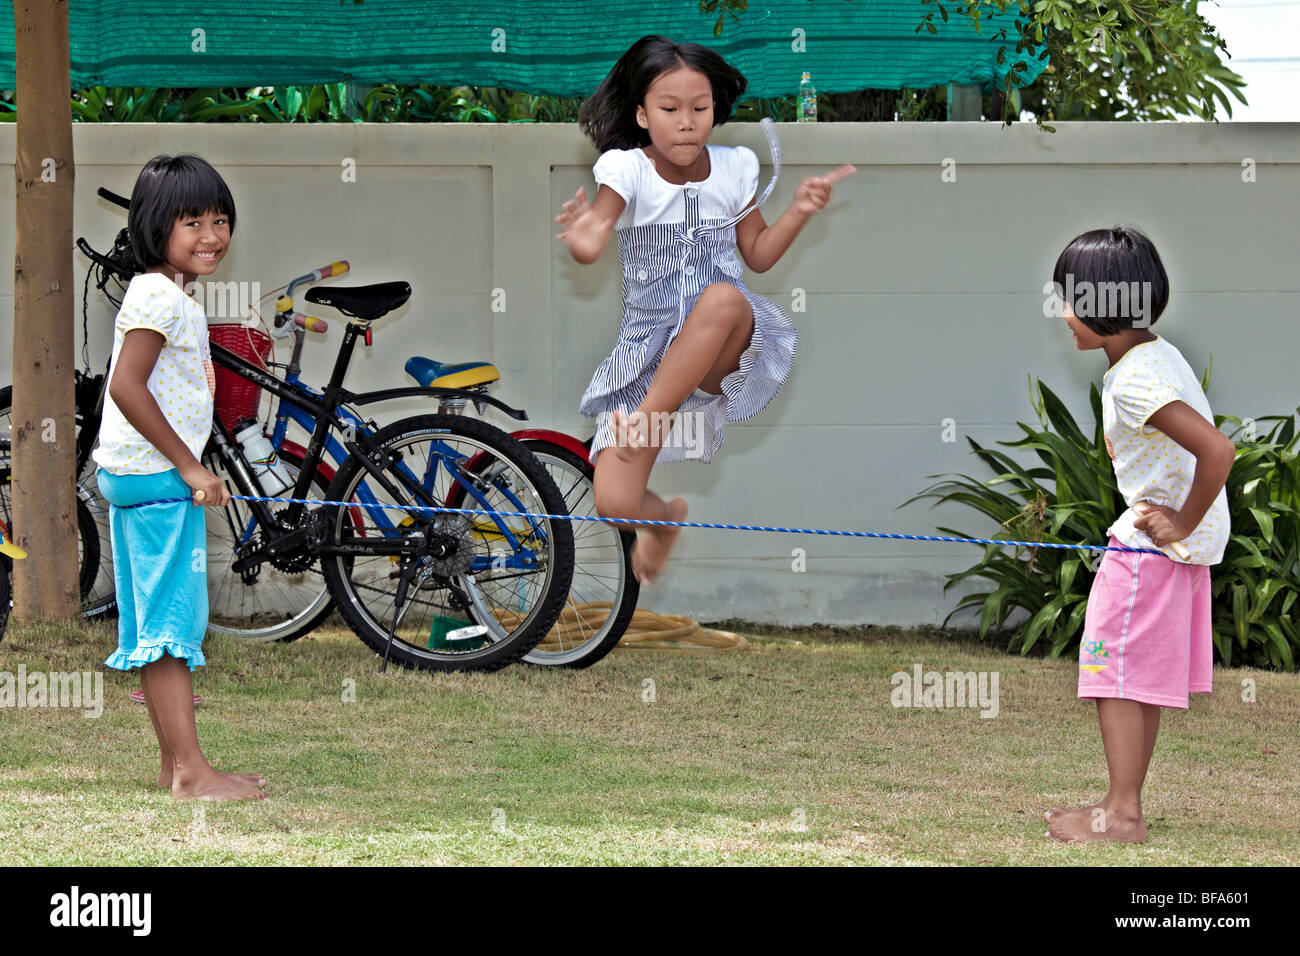 Youngsters playing in the garden and jumping a rope. Thailand S. E. Asia Stock Photo